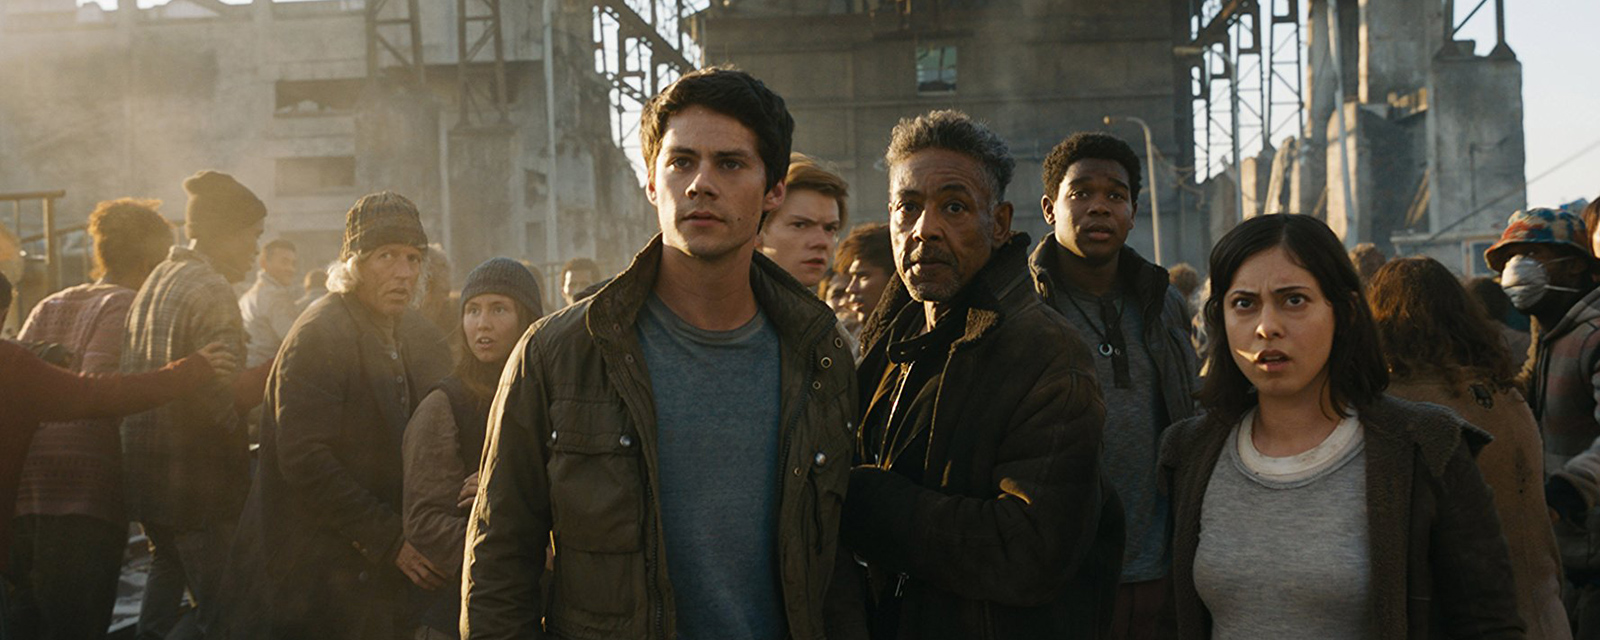 Maze Runner 3 takes you on a zombified tour of Cape Town